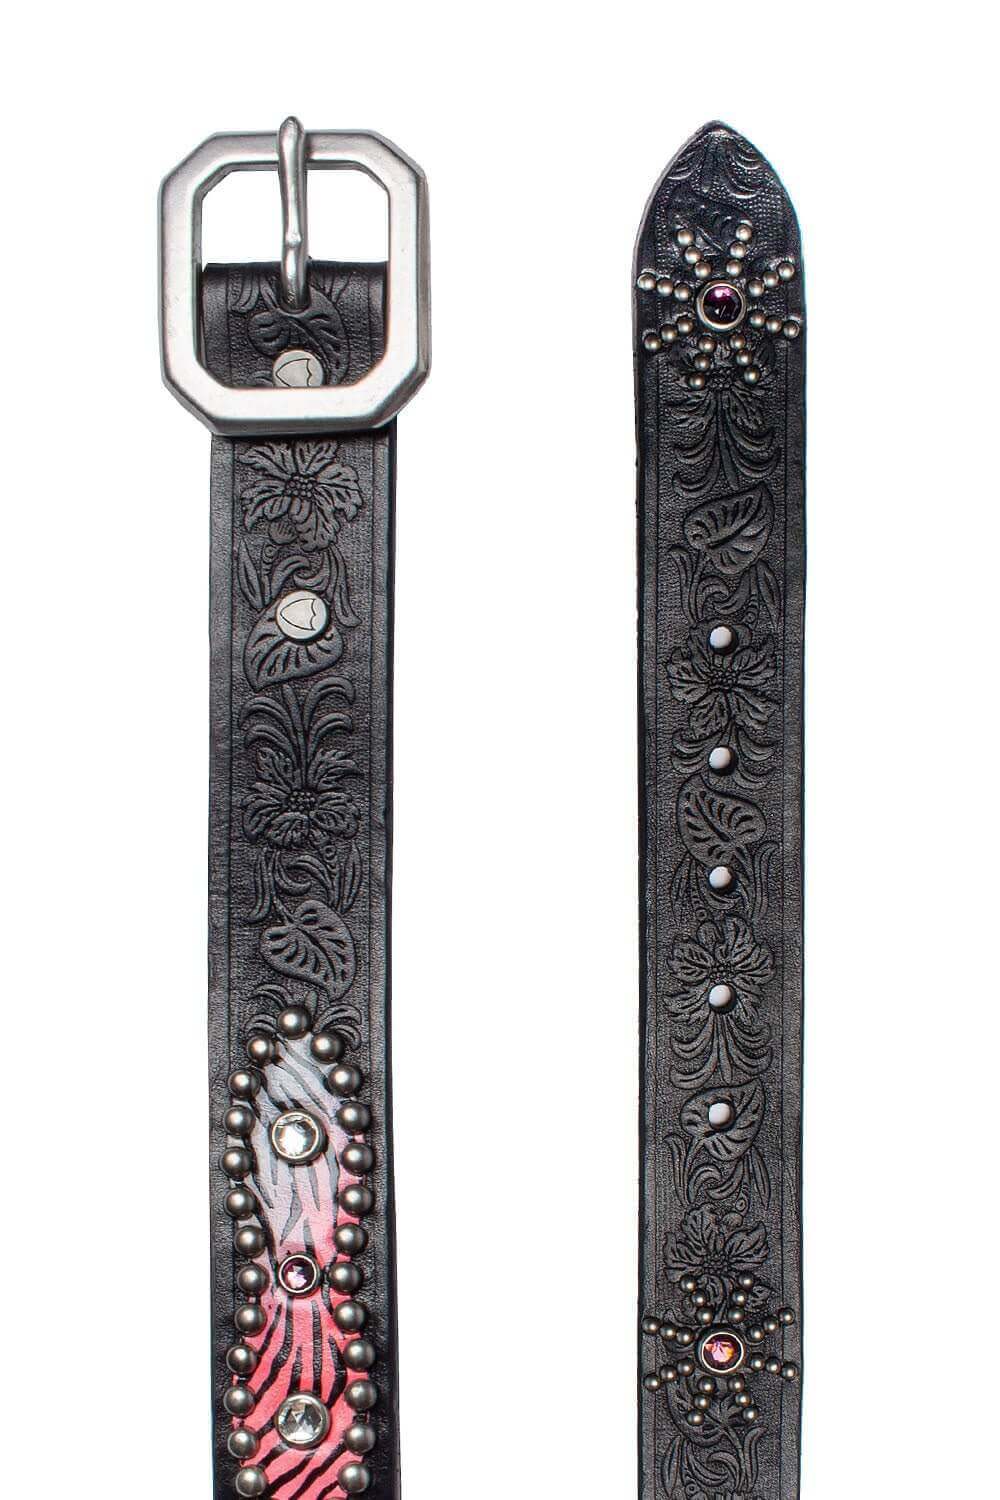 AMERICAN PAINTED BELT Black leather belt with studs and rhinestones.Height: 3 cm. Made in Italy. HTC LOS ANGELES